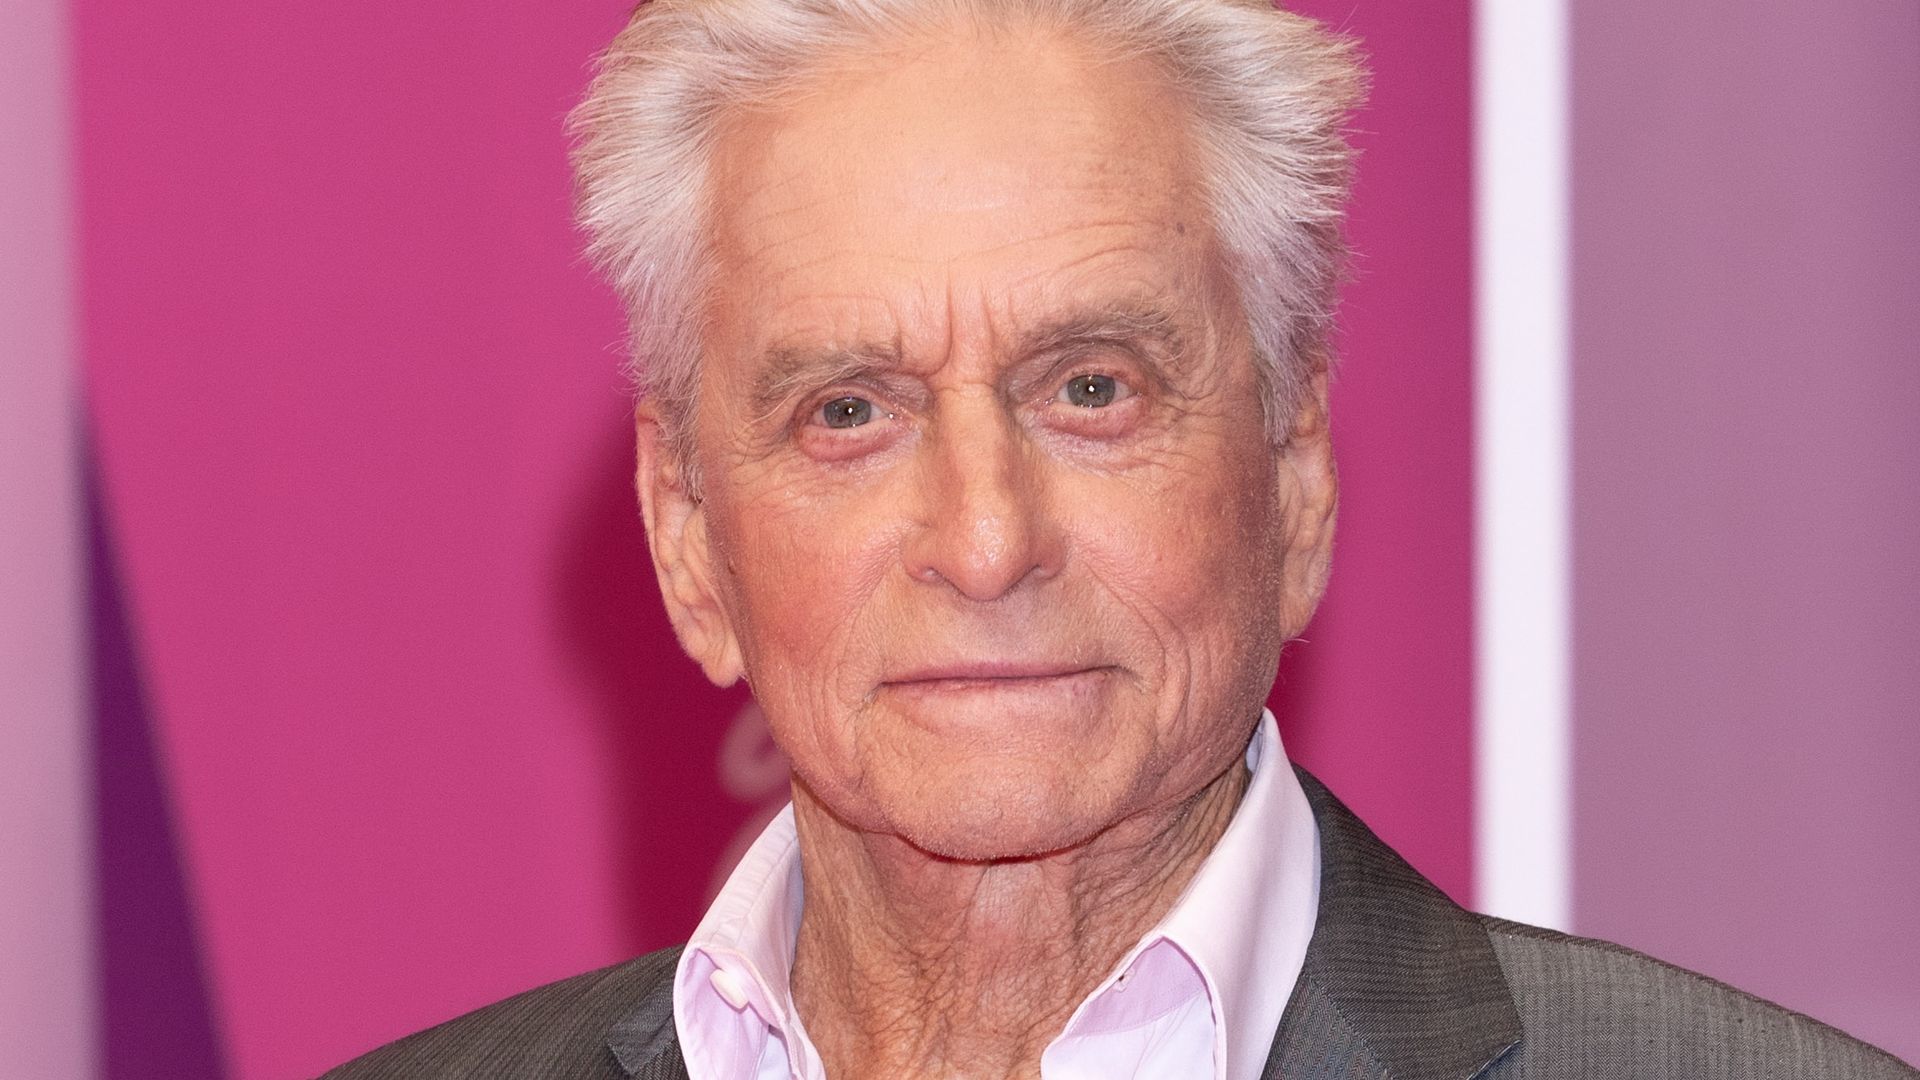 Michael Douglas shocks with confession about change to his appearance